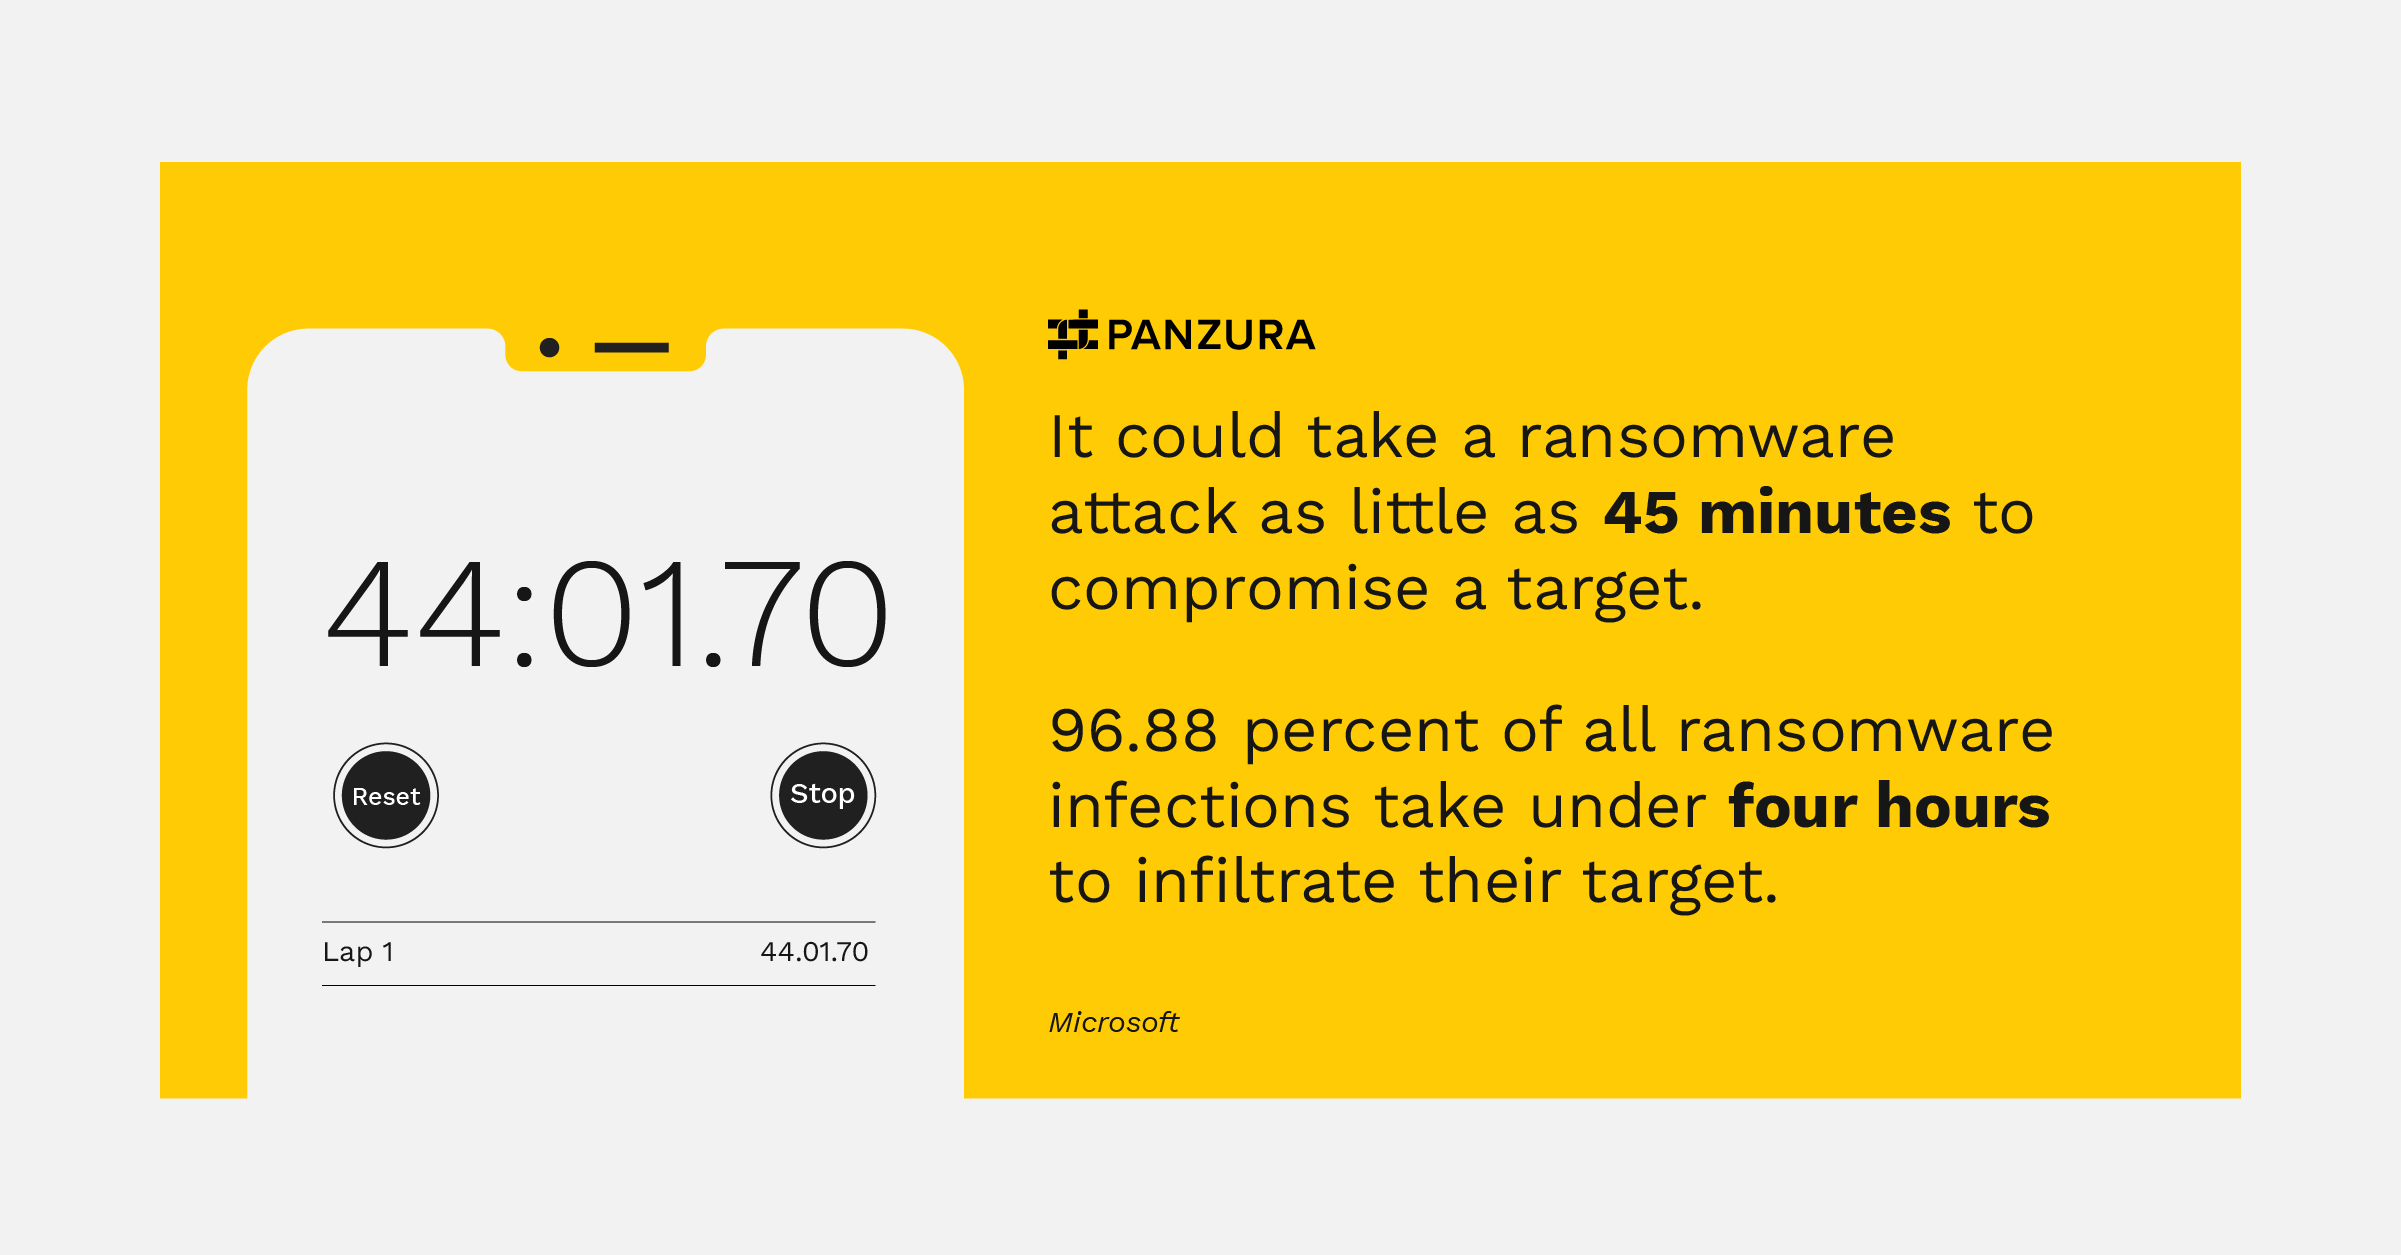 Ransomware Infographic stat: it could take an attack as little as 45 minutes to compromise a target